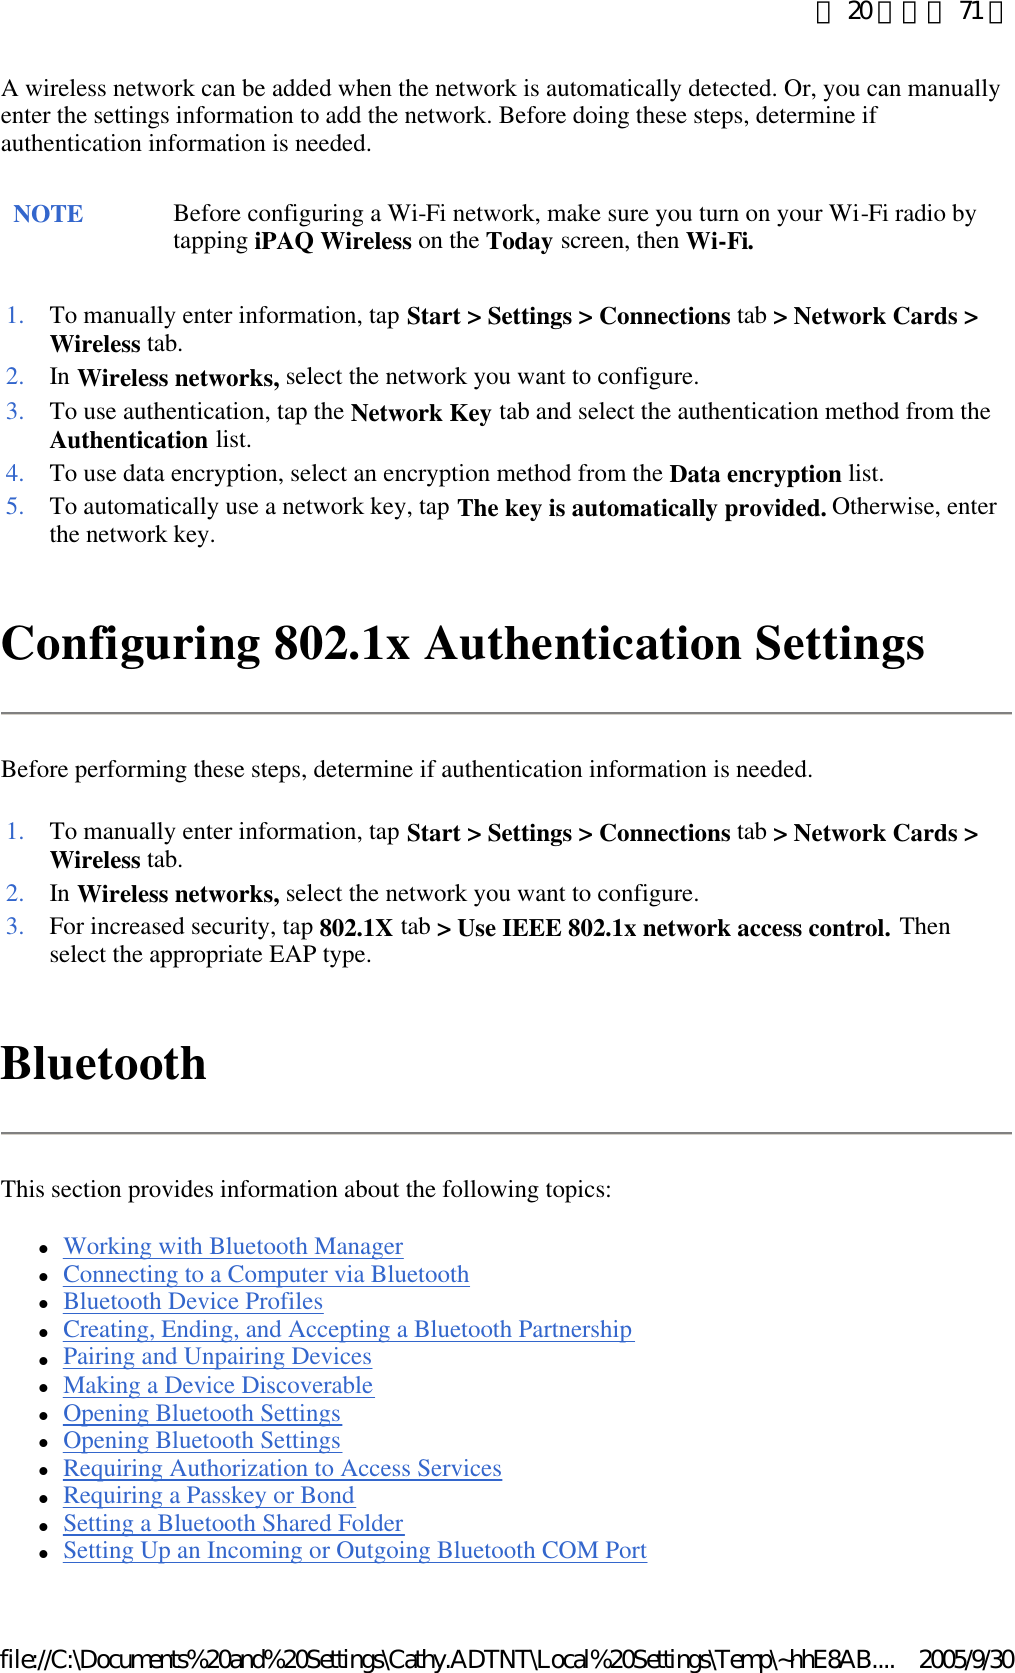 A wireless network can be added when the network is automatically detected. Or, you can manually enter the settings information to add the network. Before doing these steps, determine if authentication information is needed.  Configuring 802.1x Authentication Settings Before performing these steps, determine if authentication information is needed. Bluetooth This section provides information about the following topics:  lWorking with Bluetooth Manager  lConnecting to a Computer via Bluetooth  lBluetooth Device Profiles  lCreating, Ending, and Accepting a Bluetooth Partnership  lPairing and Unpairing Devices  lMaking a Device Discoverable  lOpening Bluetooth Settings  lOpening Bluetooth Settings  lRequiring Authorization to Access Services  lRequiring a Passkey or Bond  lSetting a Bluetooth Shared Folder  lSetting Up an Incoming or Outgoing Bluetooth COM Port  NOTE Before configuring a Wi-Fi network, make sure you turn on your Wi-Fi radio by tapping iPAQ Wireless on the Today screen, then Wi-Fi. 1. To manually enter information, tap Start &gt; Settings &gt; Connections tab &gt; Network Cards &gt; Wireless tab. 2. In Wireless networks, select the network you want to configure. 3. To use authentication, tap the Network Key tab and select the authentication method from the Authentication list. 4. To use data encryption, select an encryption method from the Data encryption list. 5. To automatically use a network key, tap The key is automatically provided. Otherwise, enter the network key. 1. To manually enter information, tap Start &gt; Settings &gt; Connections tab &gt; Network Cards &gt; Wireless tab. 2. In Wireless networks, select the network you want to configure. 3. For increased security, tap 802.1X tab &gt; Use IEEE 802.1x network access control. Then select the appropriate EAP type. 第 20 頁，共 71 頁2005/9/30file://C:\Documents%20and%20Settings\Cathy.ADTNT\Local%20Settings\Temp\~hhE8AB....